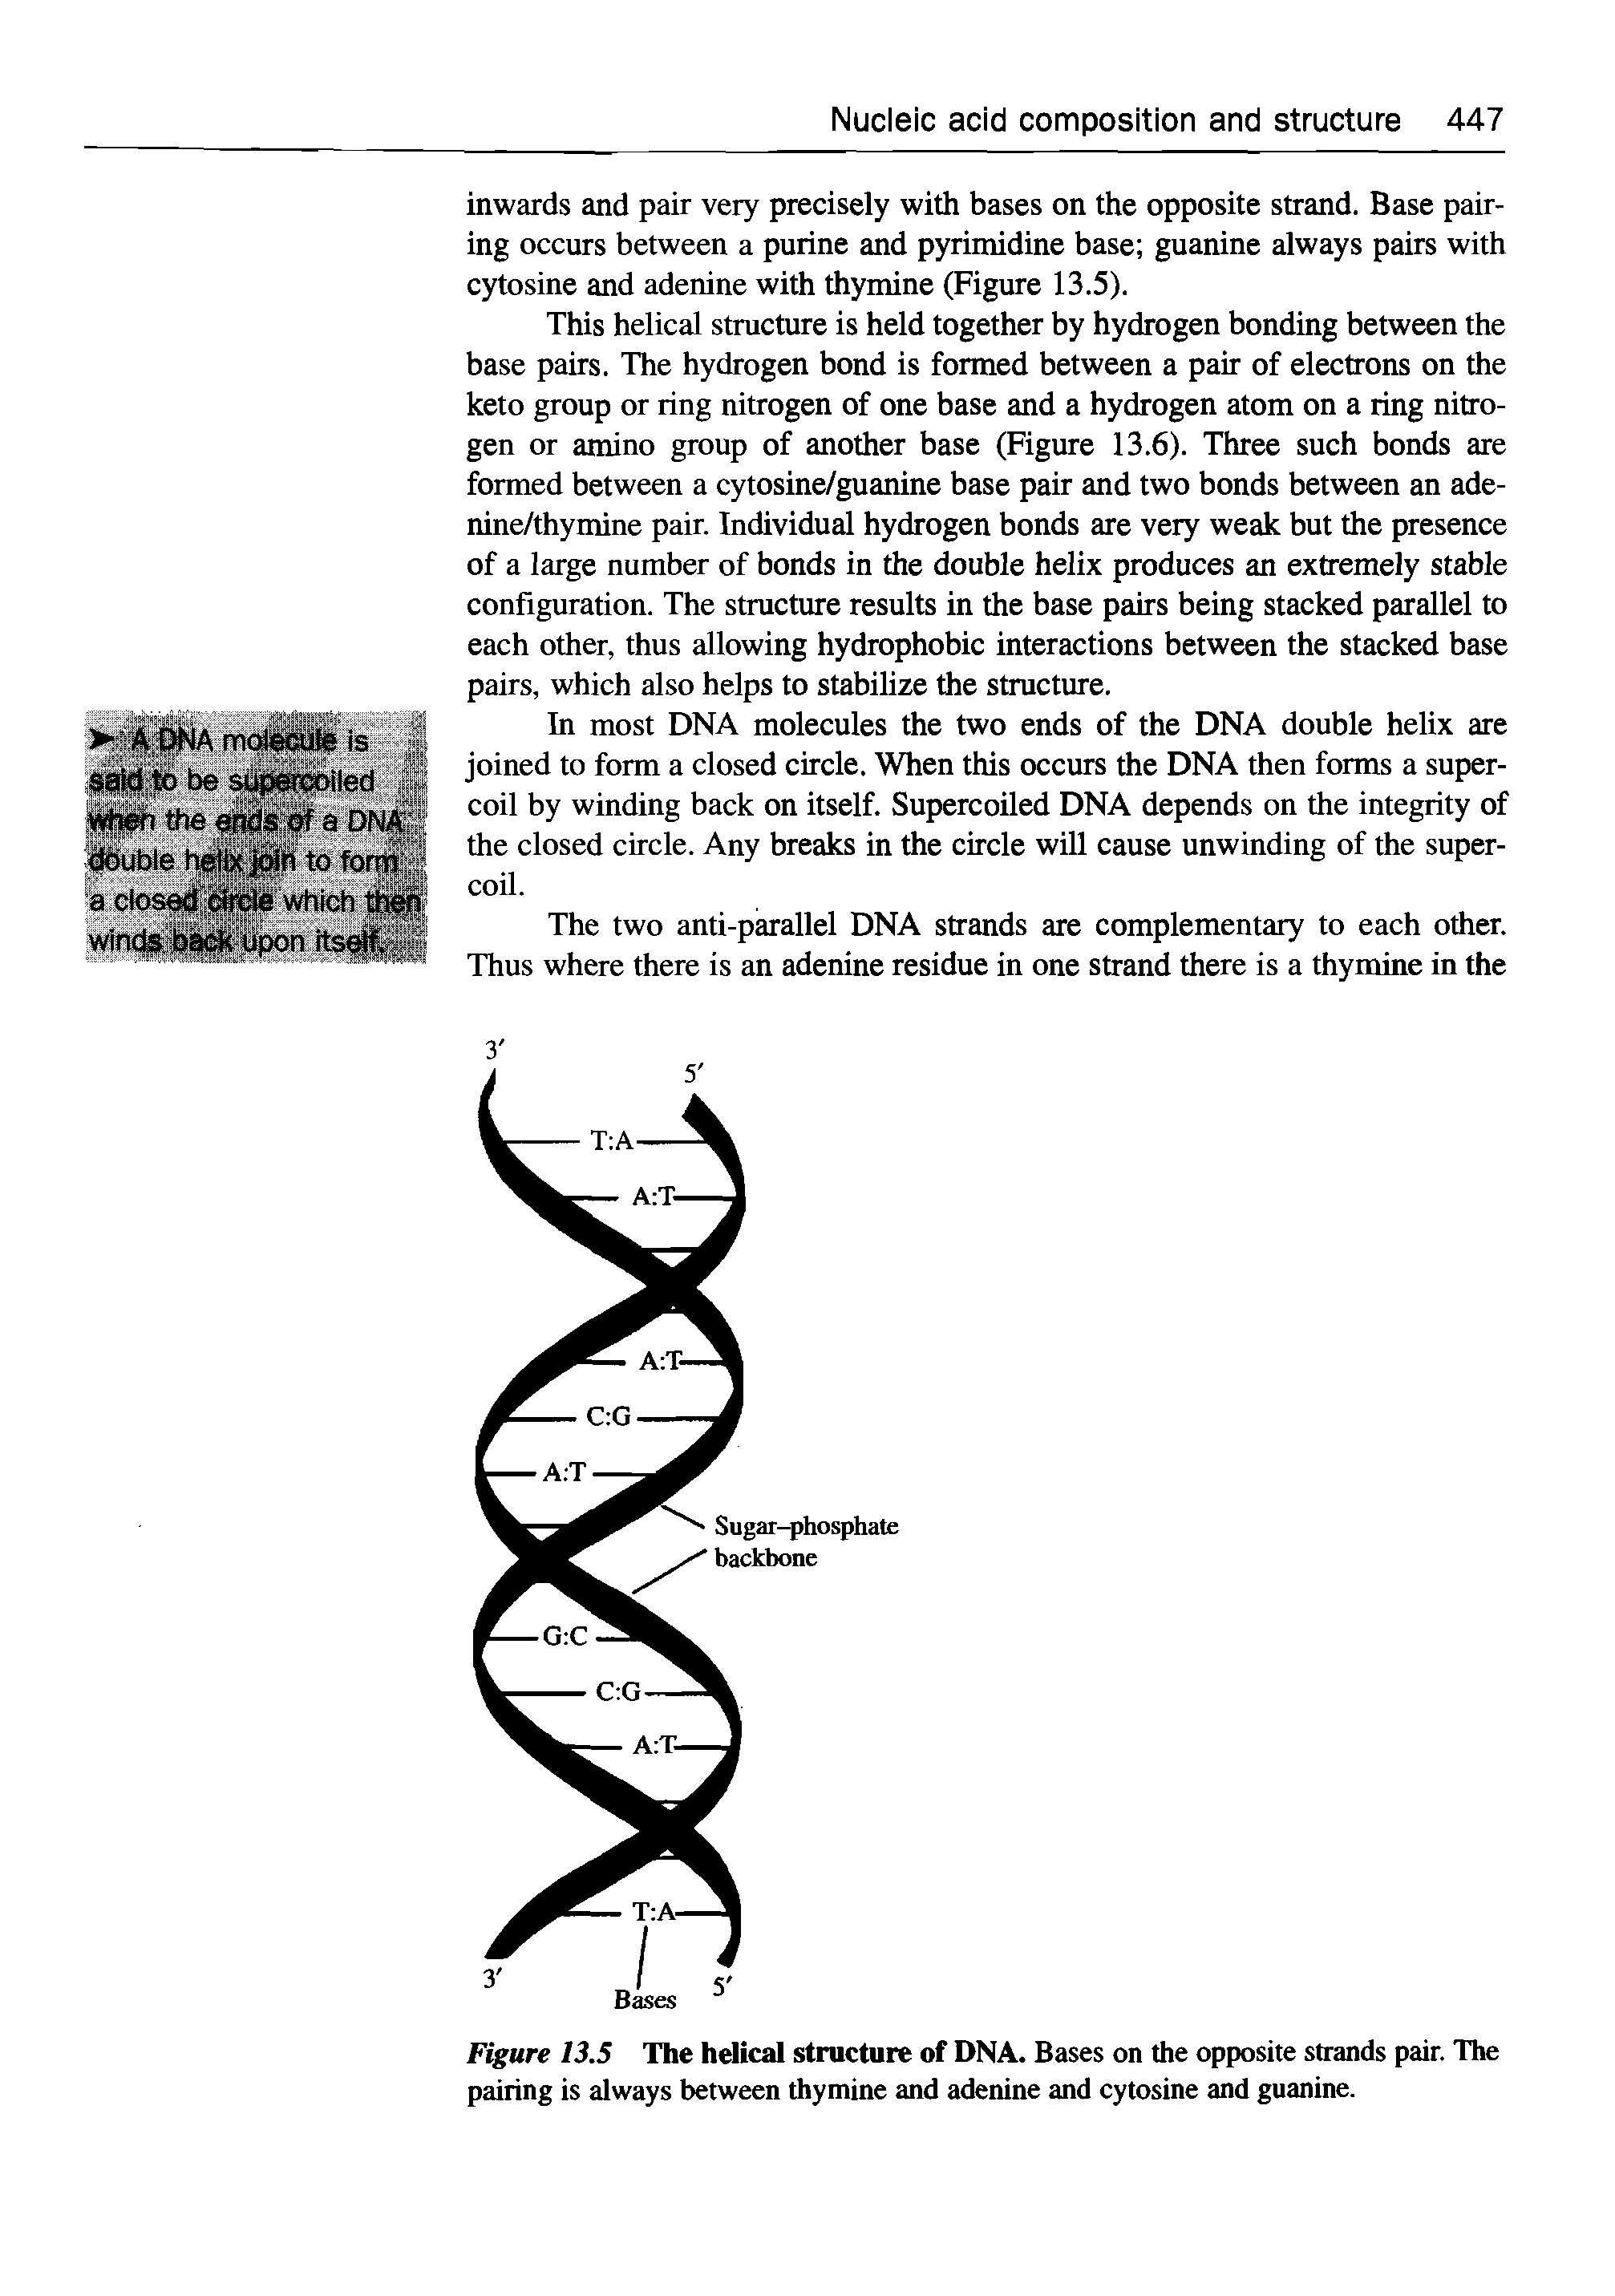 Figure 13.5 The helical structure of DNA. Bases on the opposite strands pair. The pairing is always between thymine and adenine and cytosine and guanine.